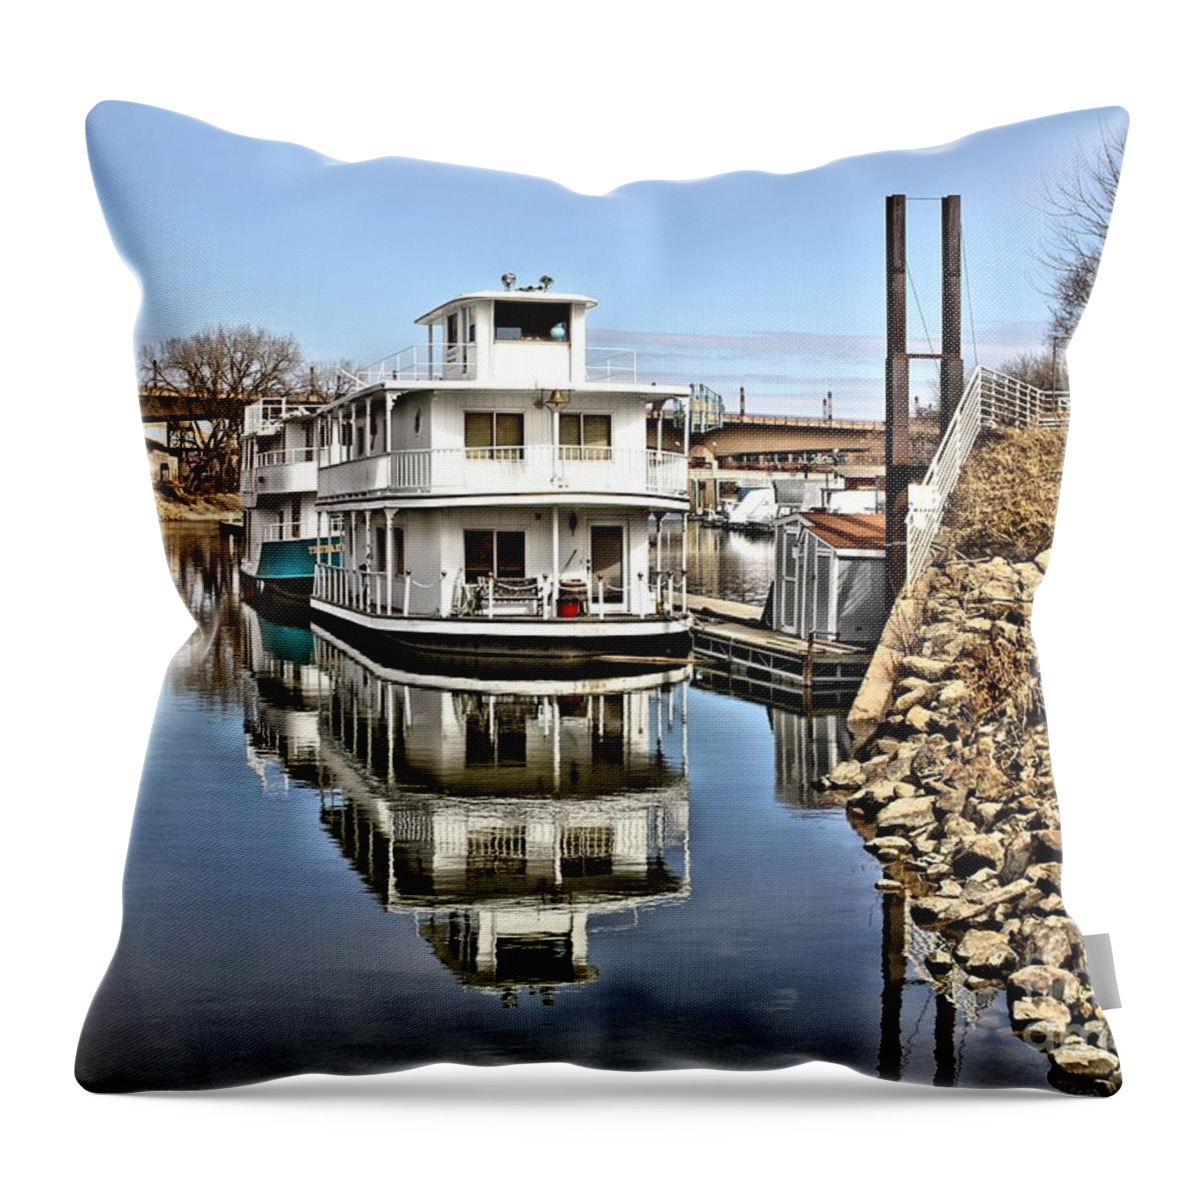 Mississippi Throw Pillow featuring the photograph Mississippi Houseboat by Jimmy Ostgard